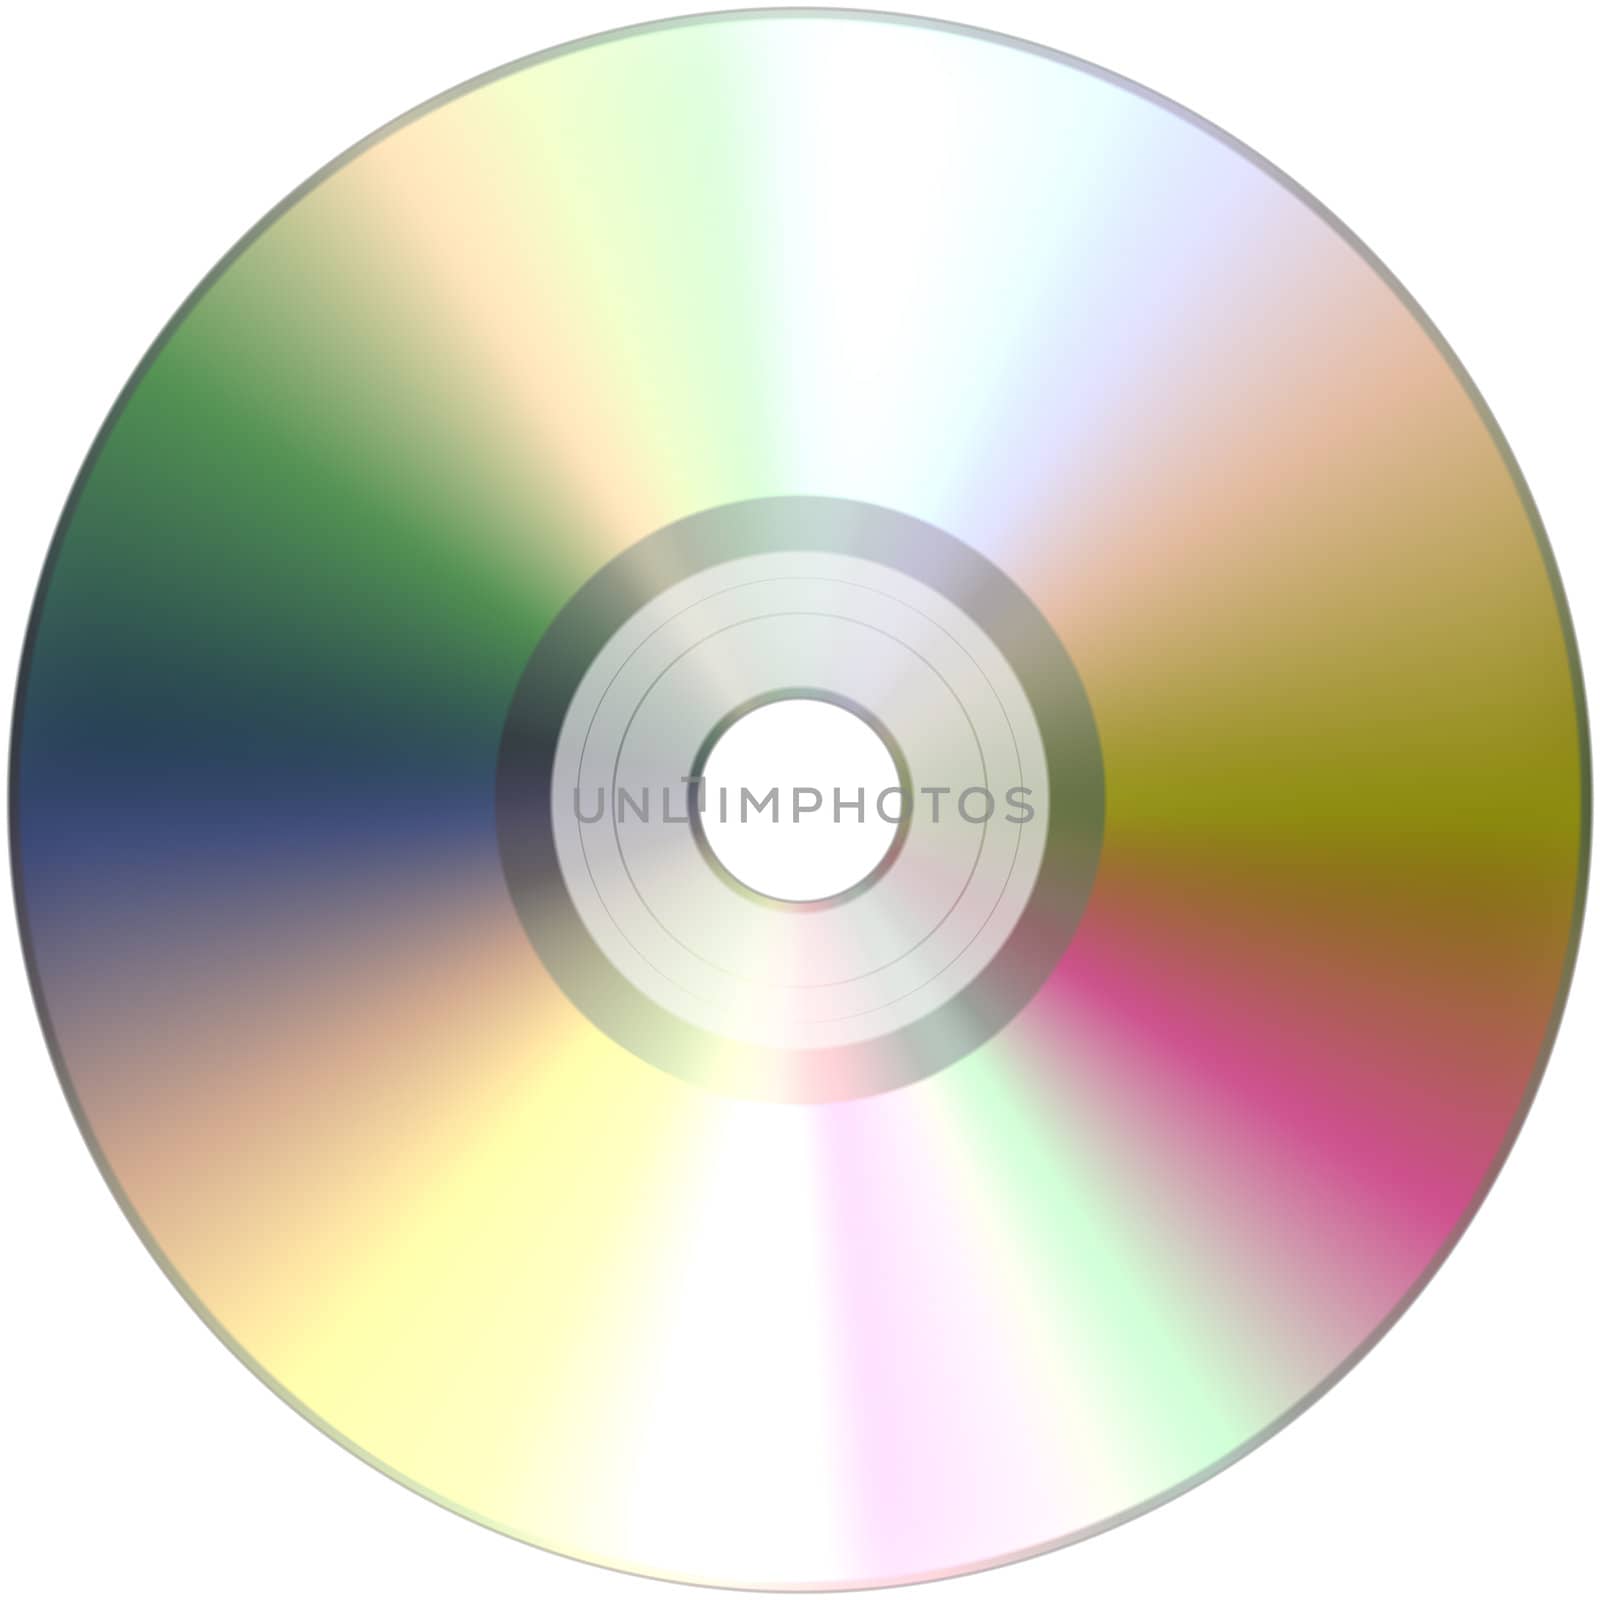 The compact disk on white,  suits for duplication of the background, illustration